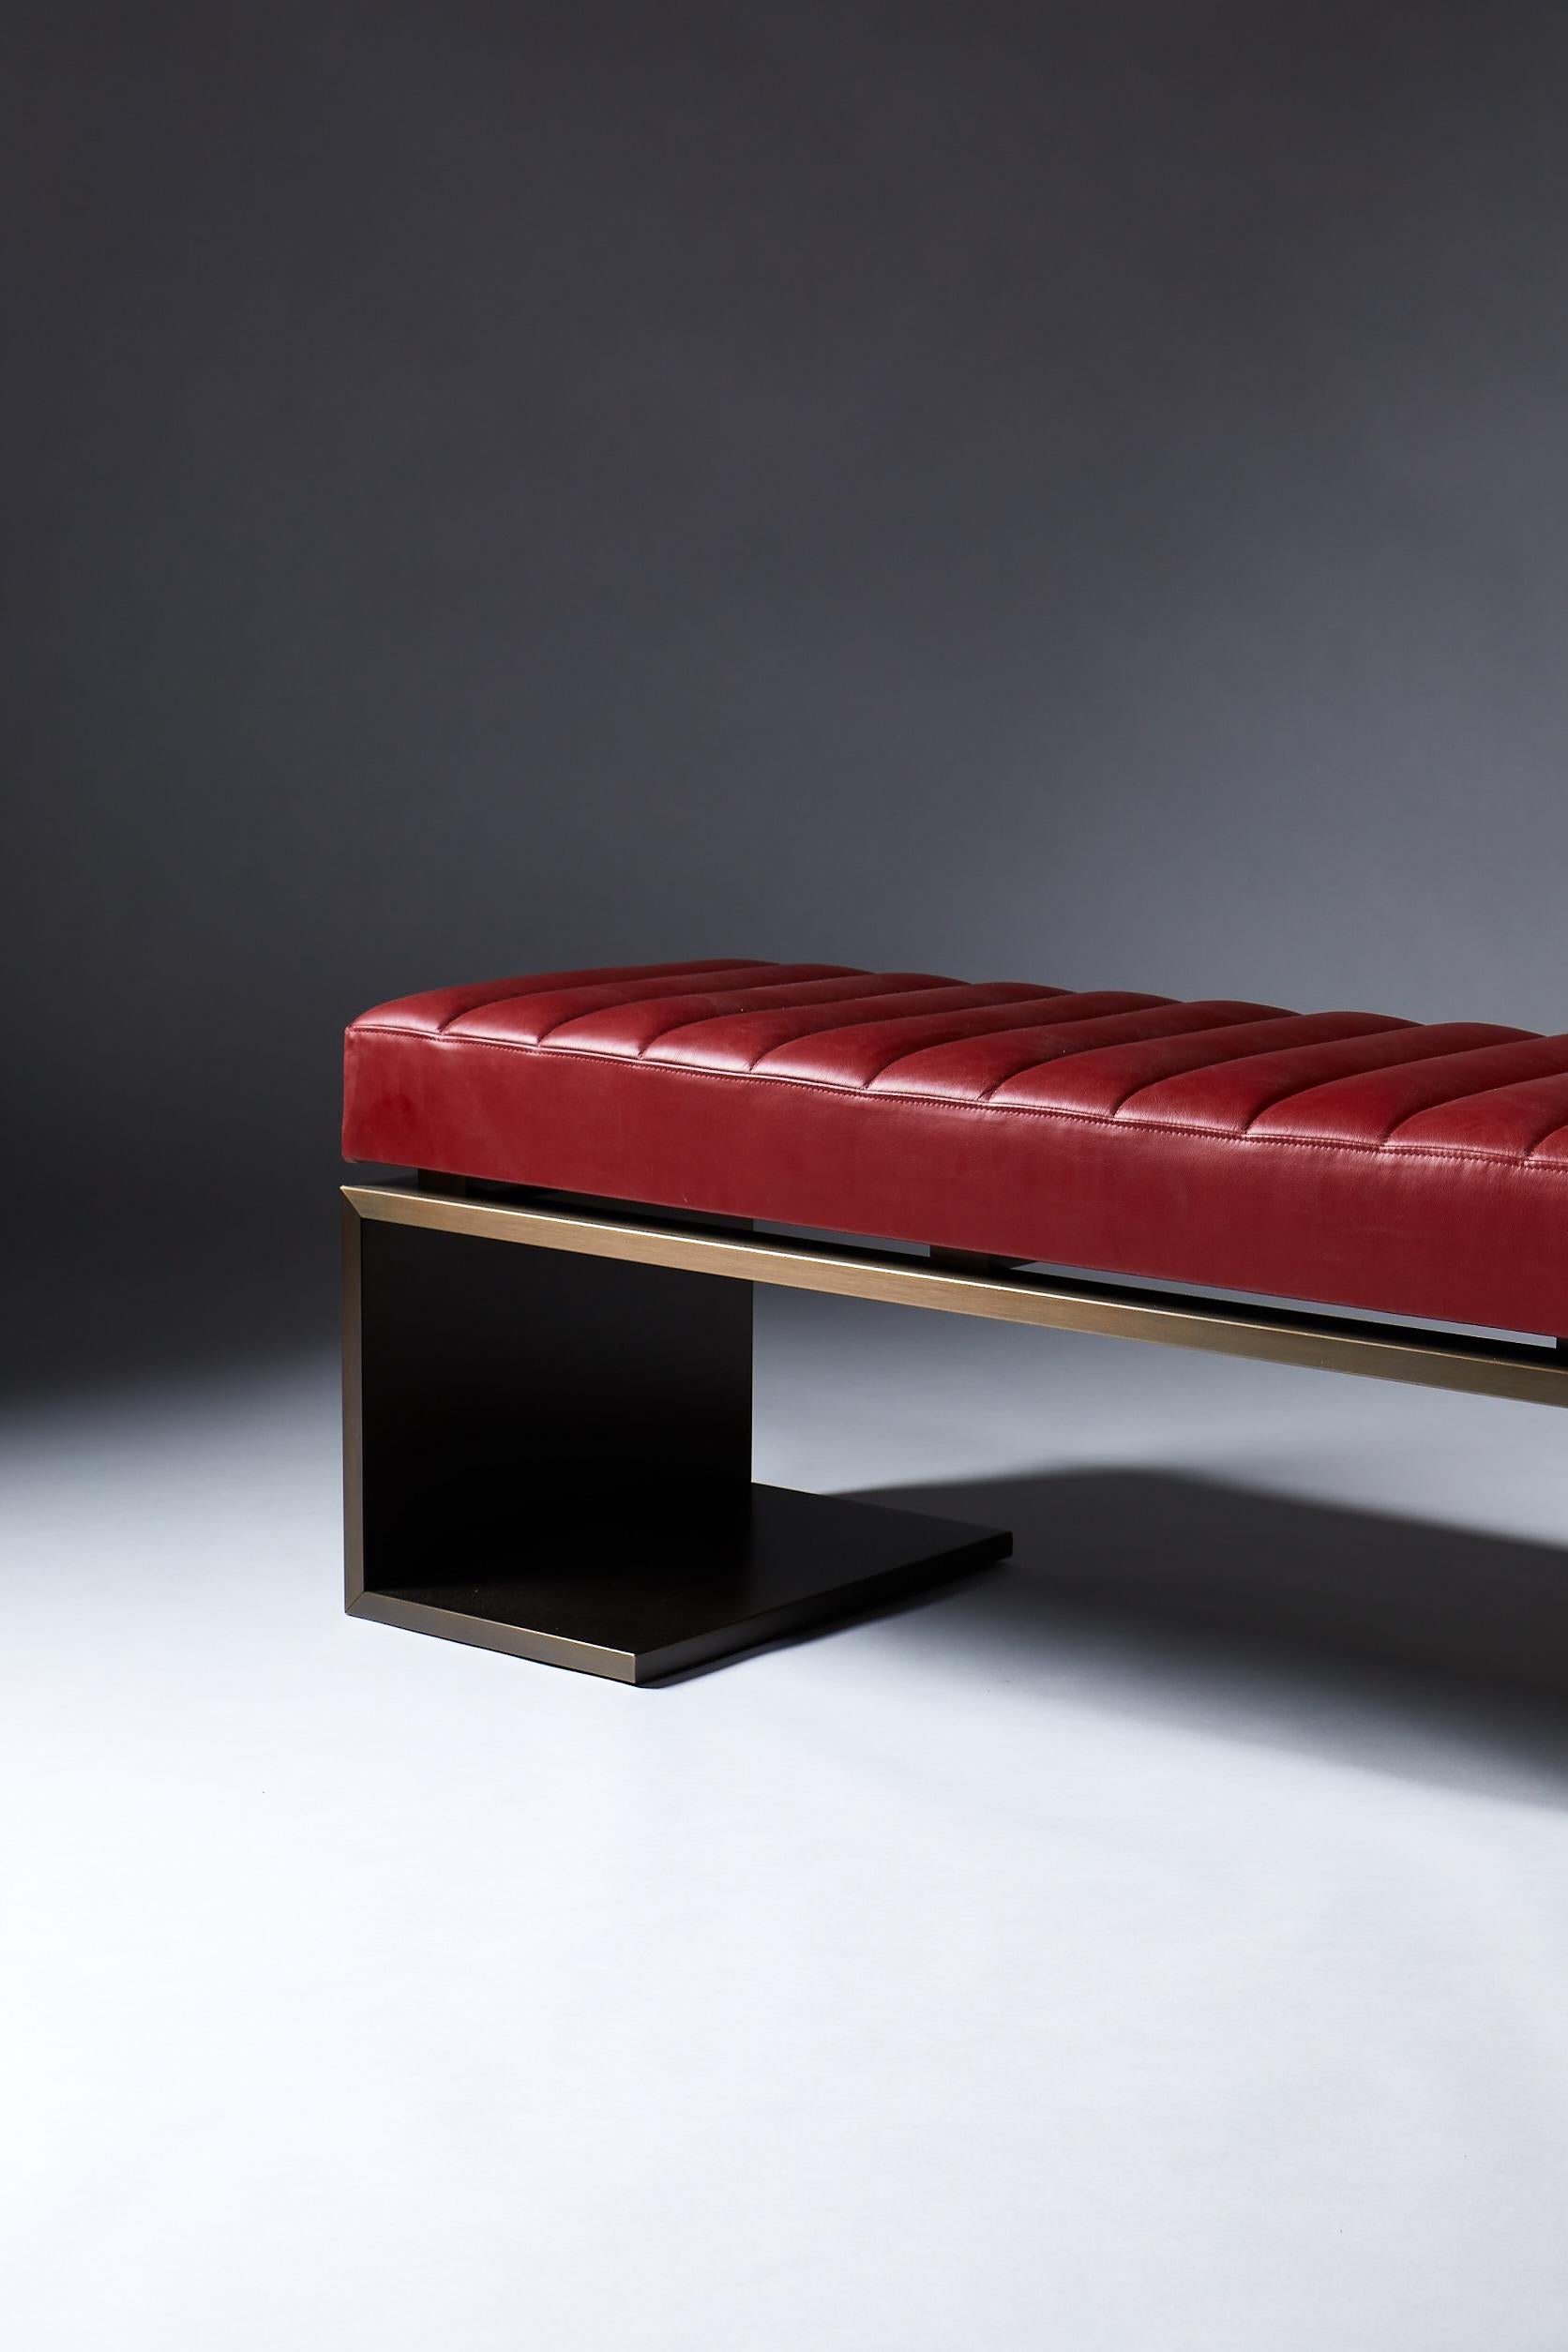 Contemporary Bronze & Leather Bench, KIMANI, by Reda Amalou Desgin, 2018 - Gallery Collection For Sale